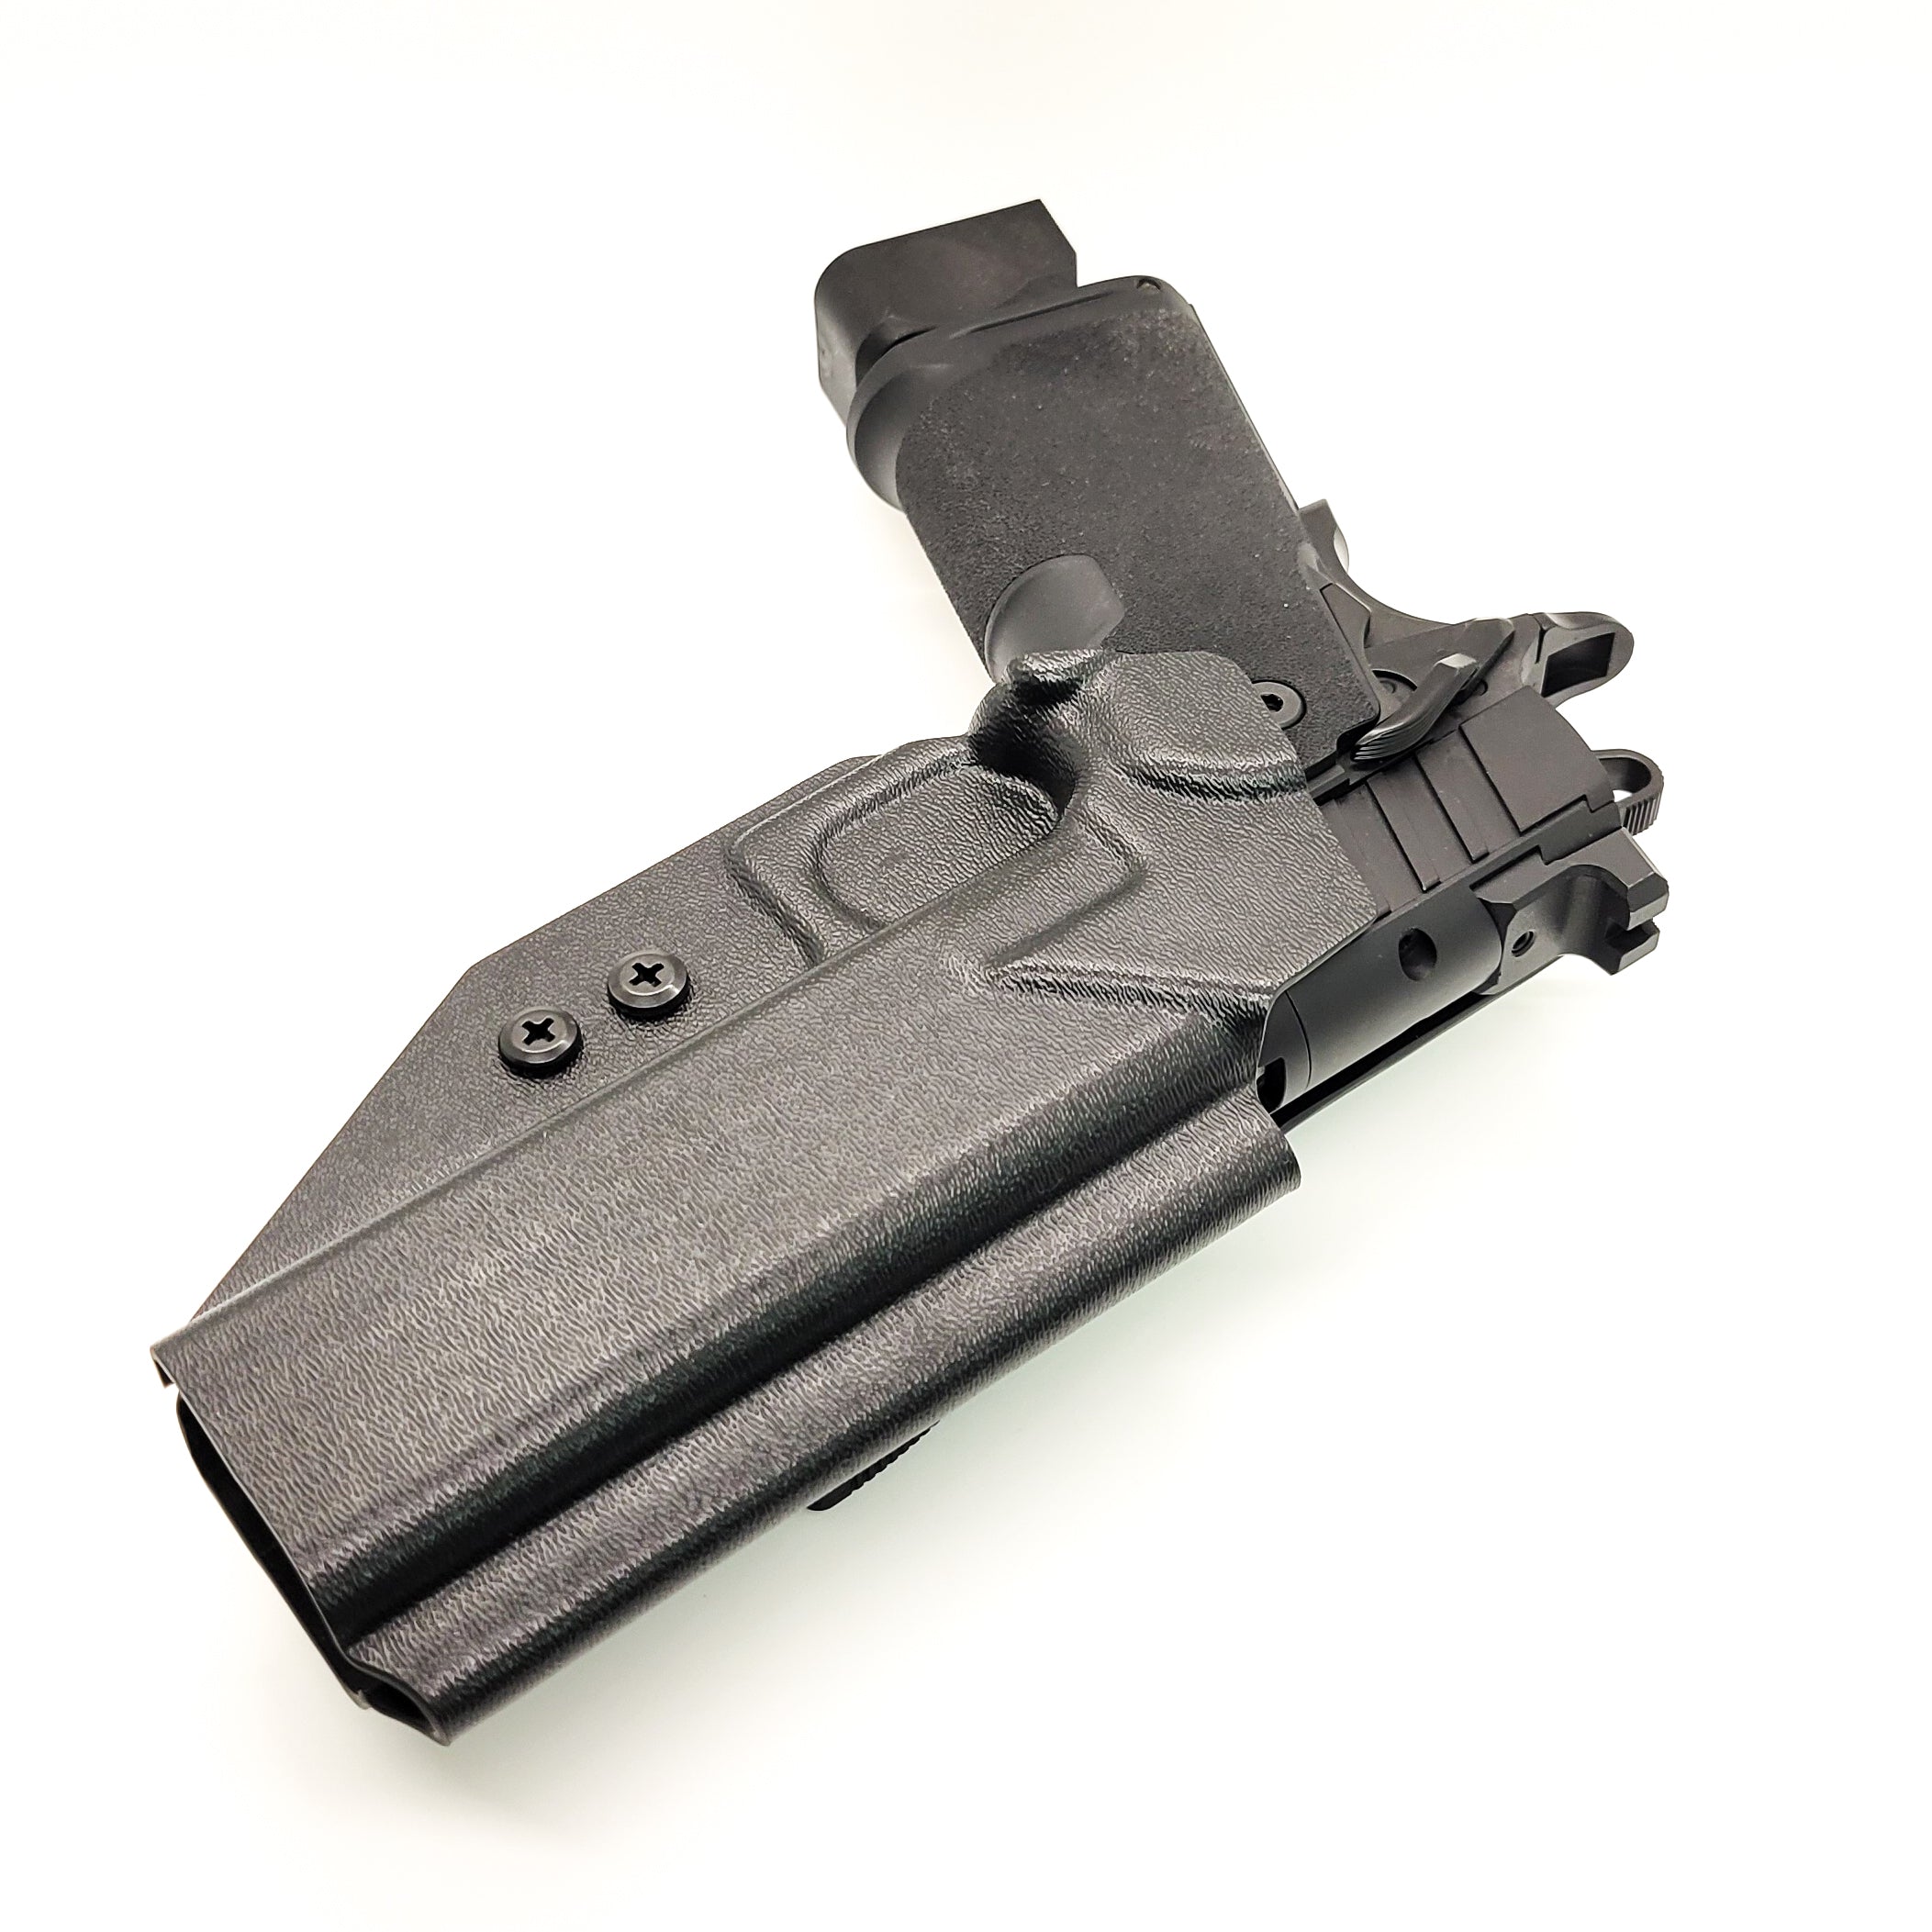 For the best Outside Waistband kydex Holster designed to fit the Springfield Armory 1911 DS Prodigy 5" & 4.25" with or without a red dot sight mounted to the pistol, shop to Four Brothers Holsters.  Full sweat guard, adjustable retention, minimal material, & smooth for reduced printing. Proudly made in the USA 